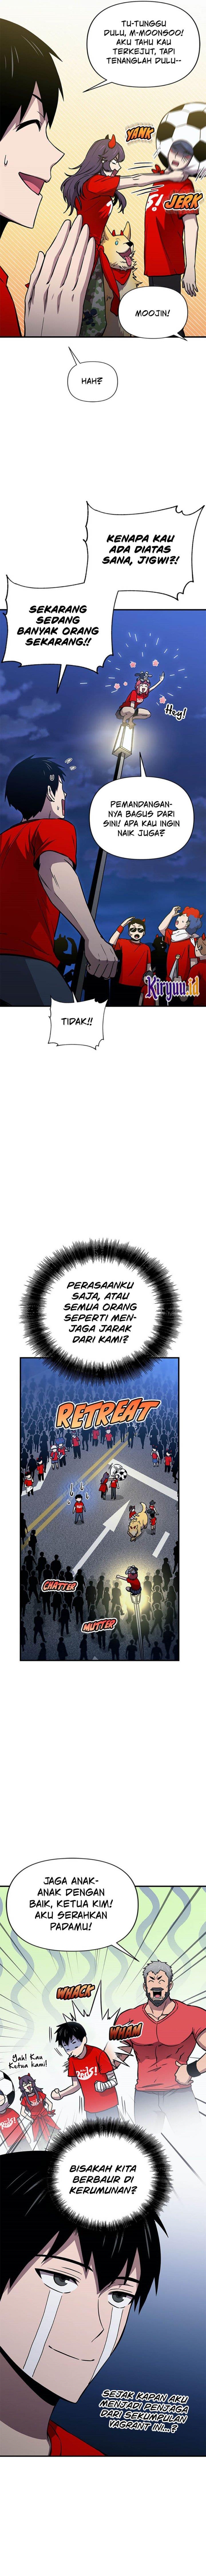 Cursed Manager’s Regression Chapter 35